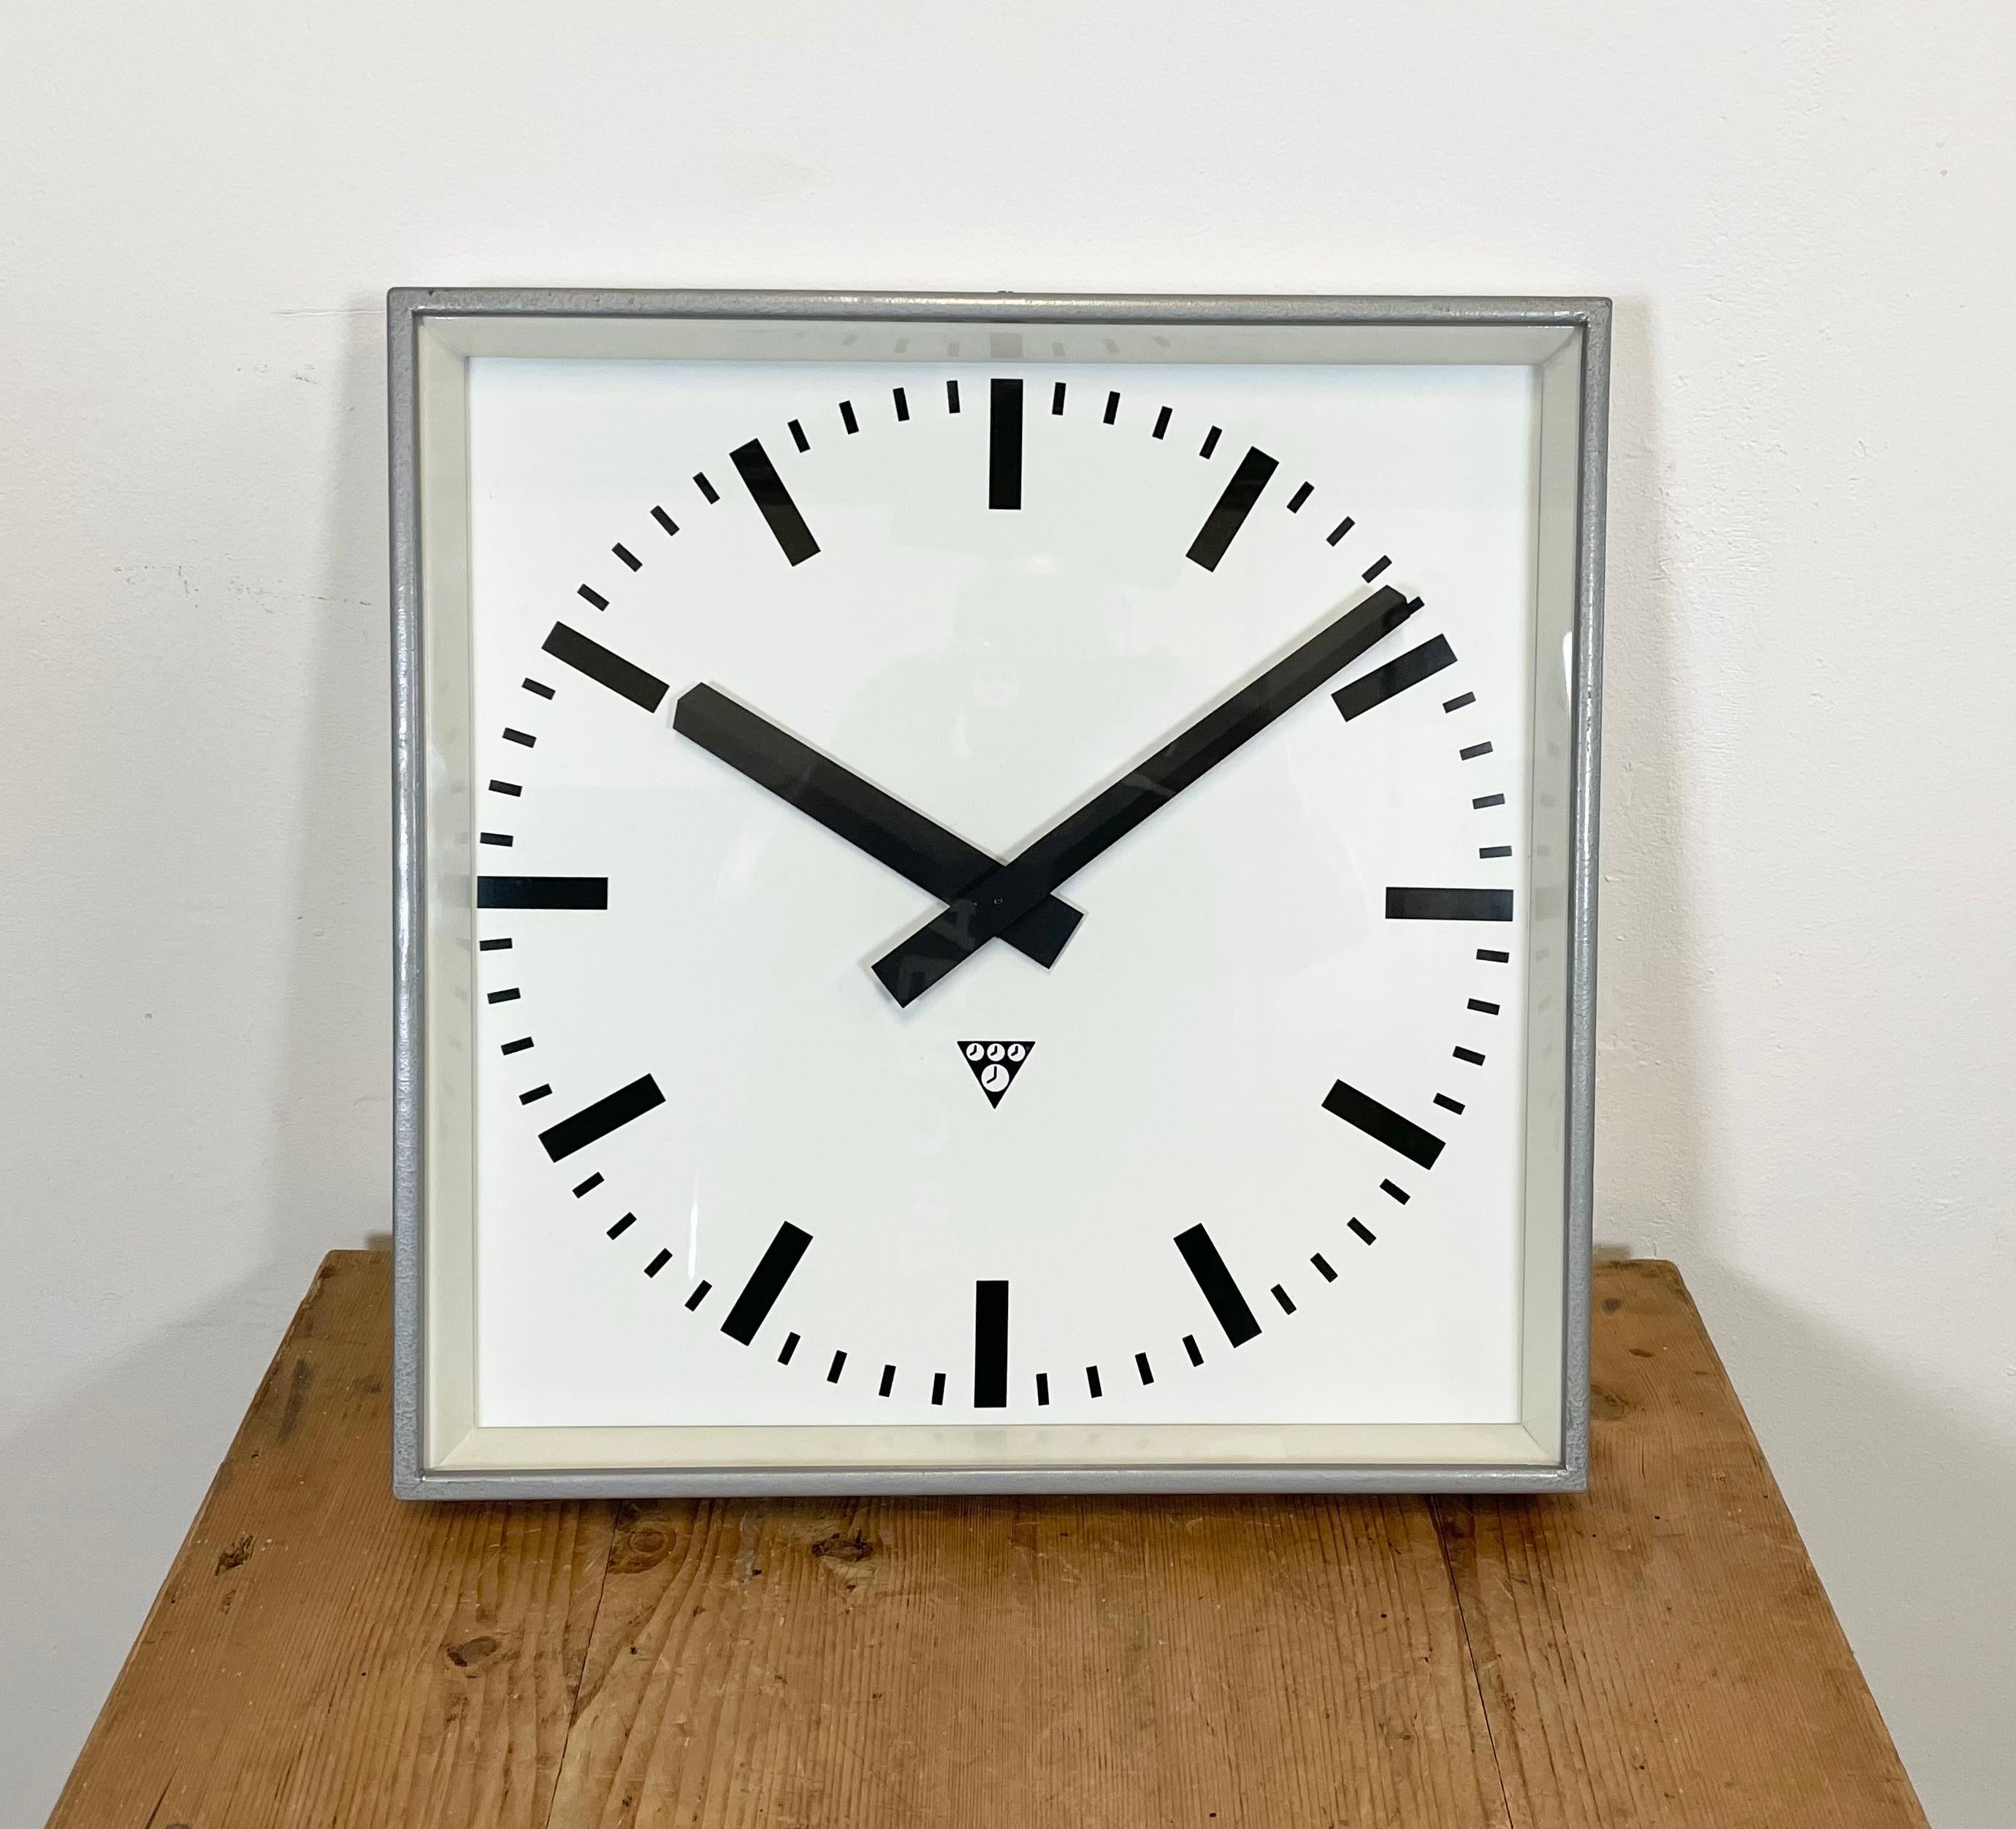 - Clock made by Pragotron in former Czechoslovakia during the 1960s
- Was used in factories, schools & railway stations
- Features a gray Hammer paint finish metal body, aluminum dial, clear glass
- Has been converted into a battery-powered